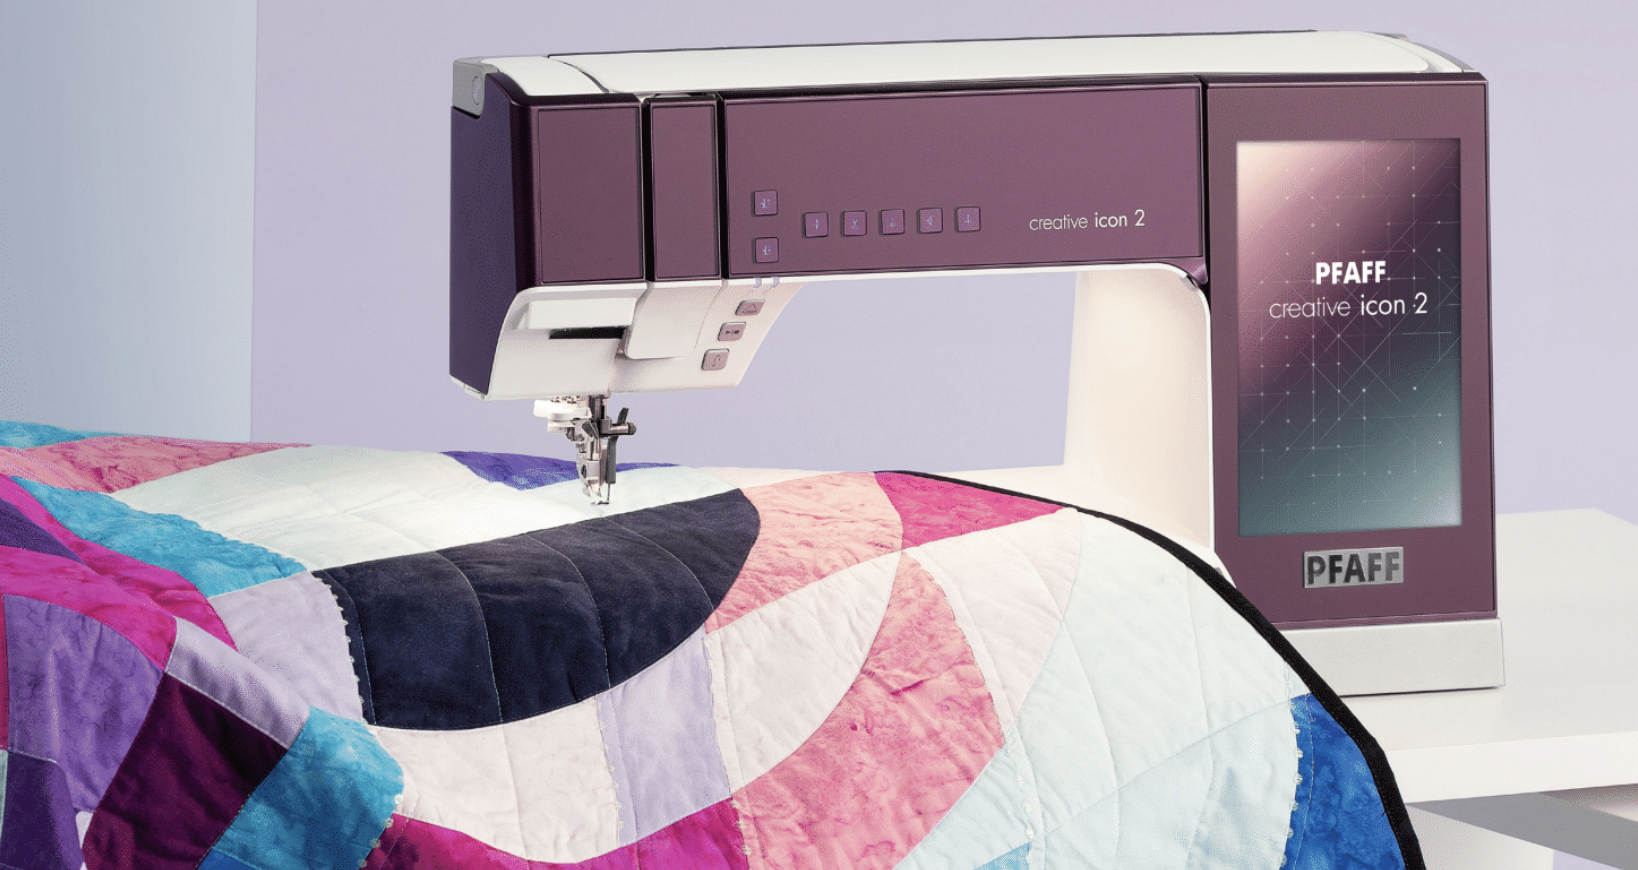 Pfaff Creative Icon 2 - Sewing Direct the worlds first